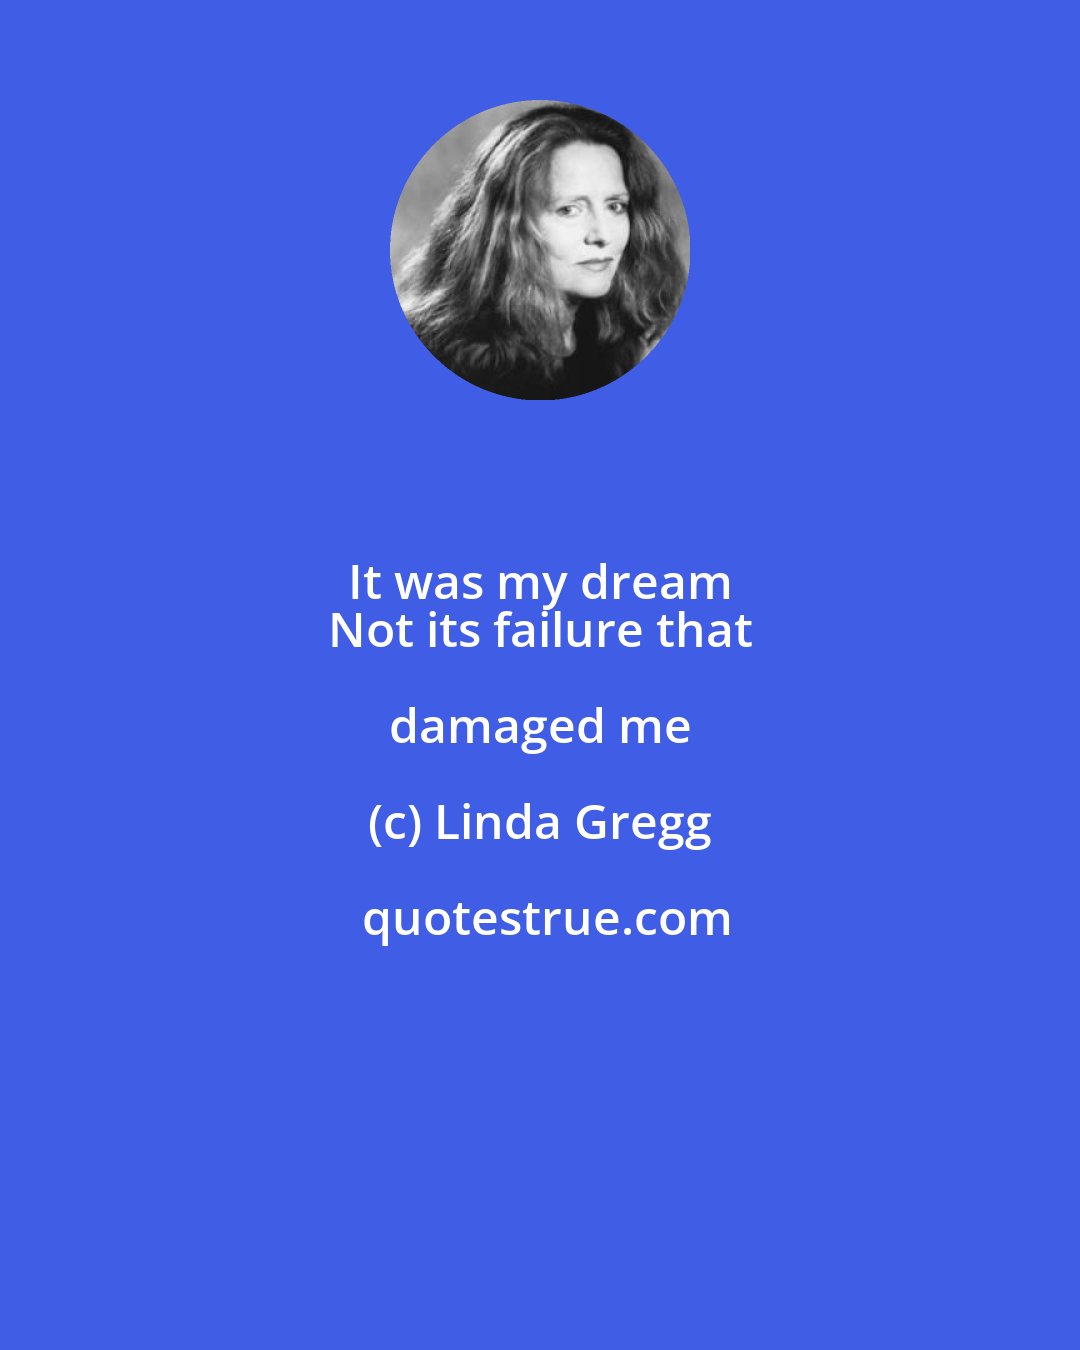 Linda Gregg: It was my dream 
 Not its failure that damaged me